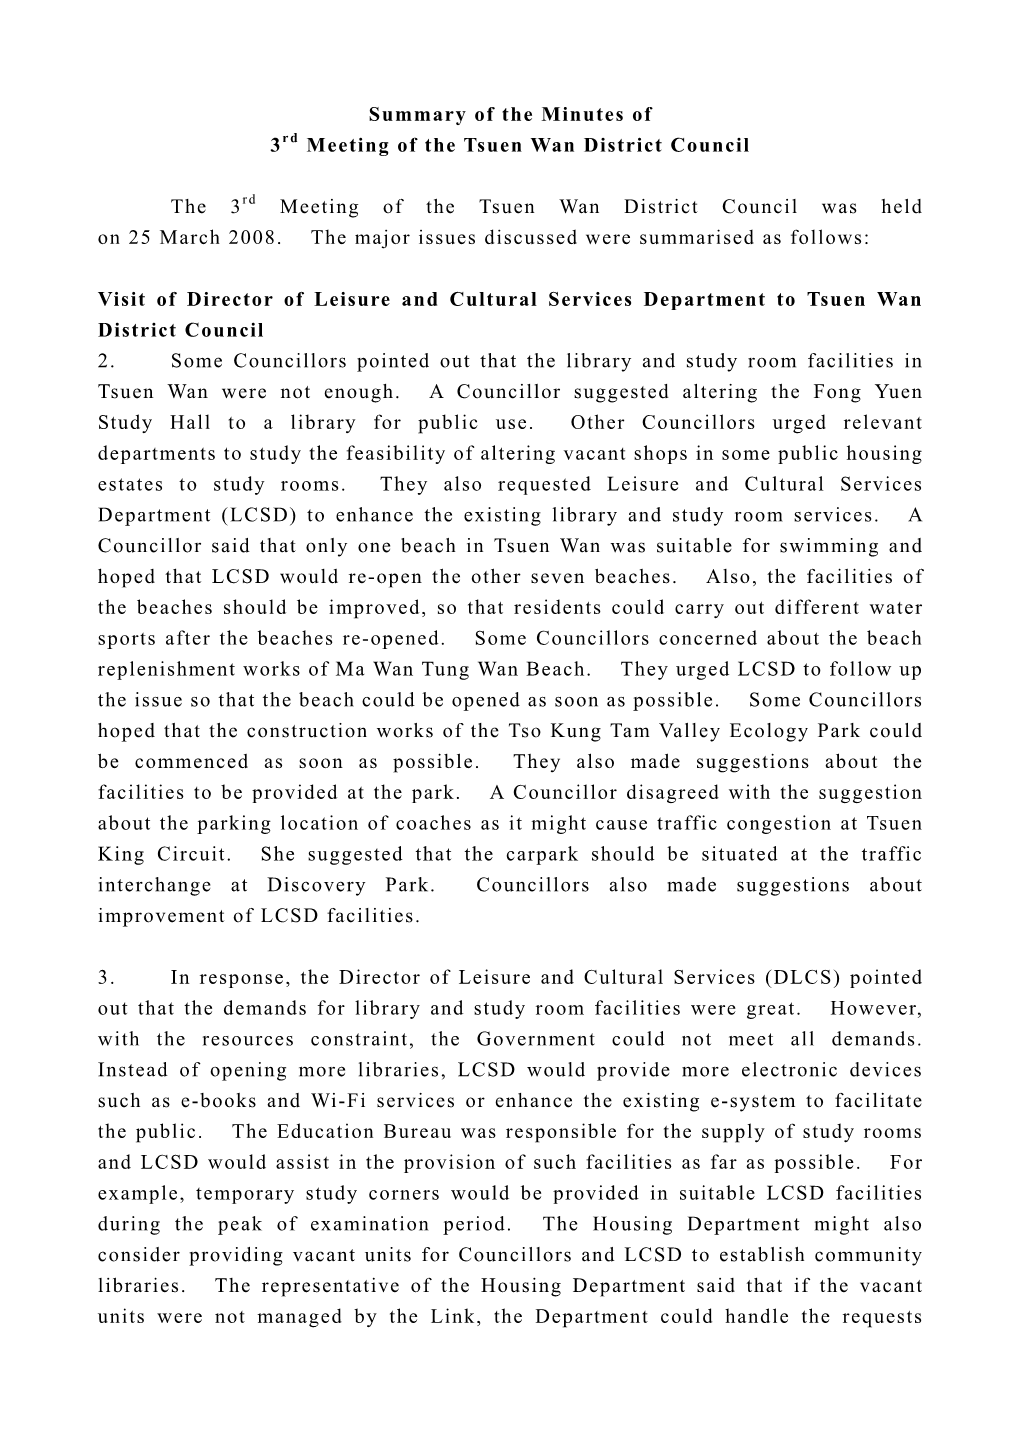 Summary of the Minutes of 3Rd Meeting of the Tsuen Wan District Council